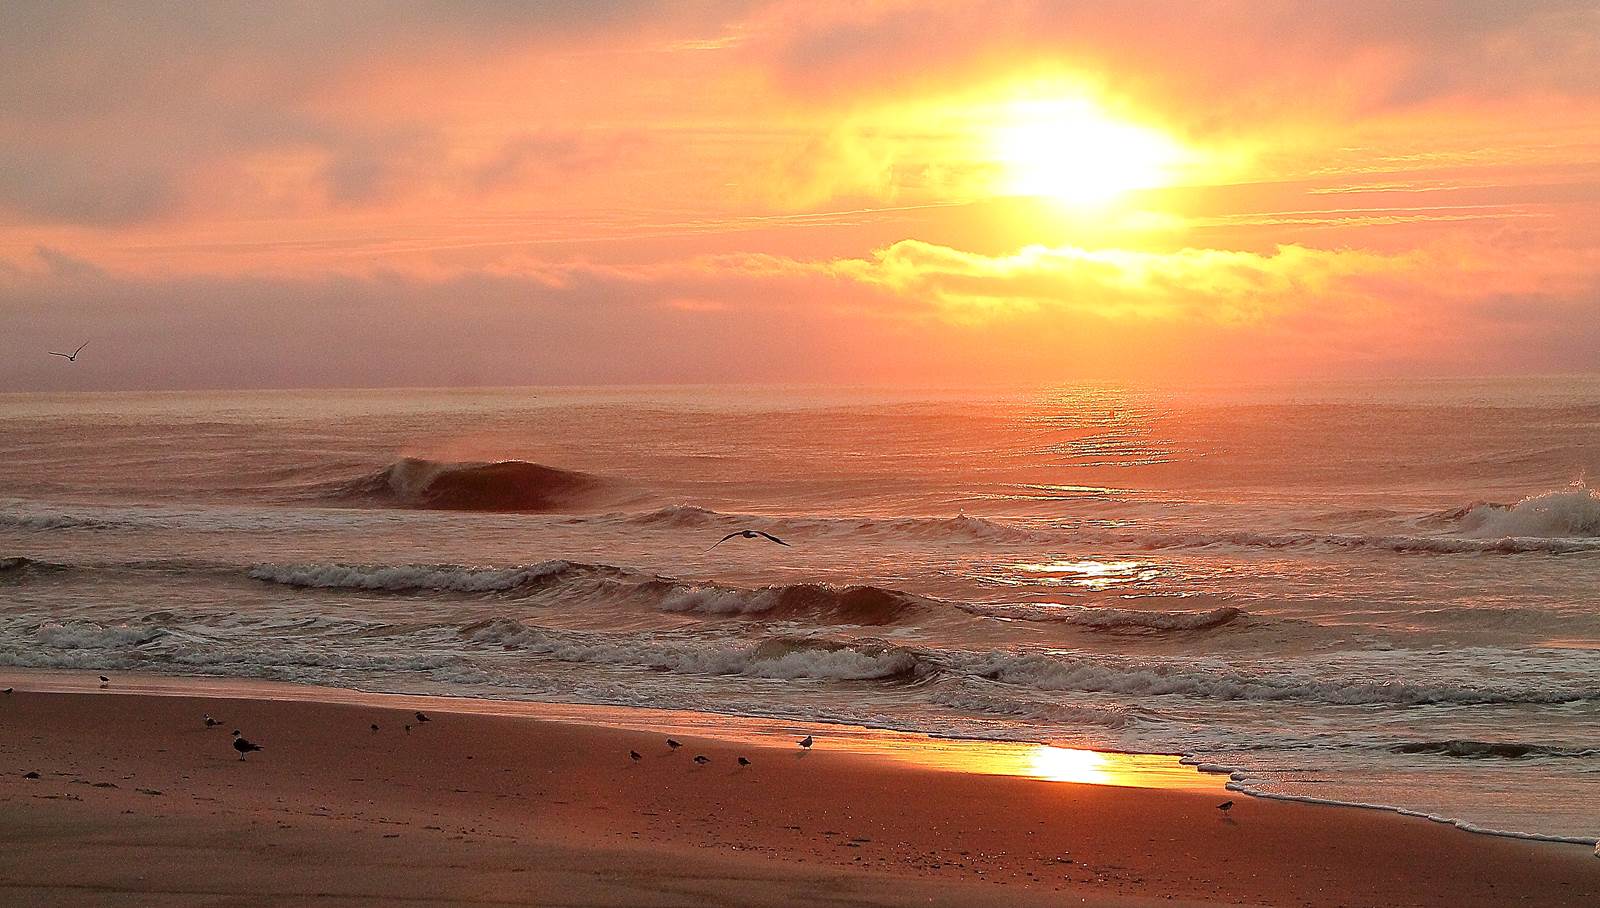 A Picture's Worth a Thousand Words: Sunrise at the Jersey Shore